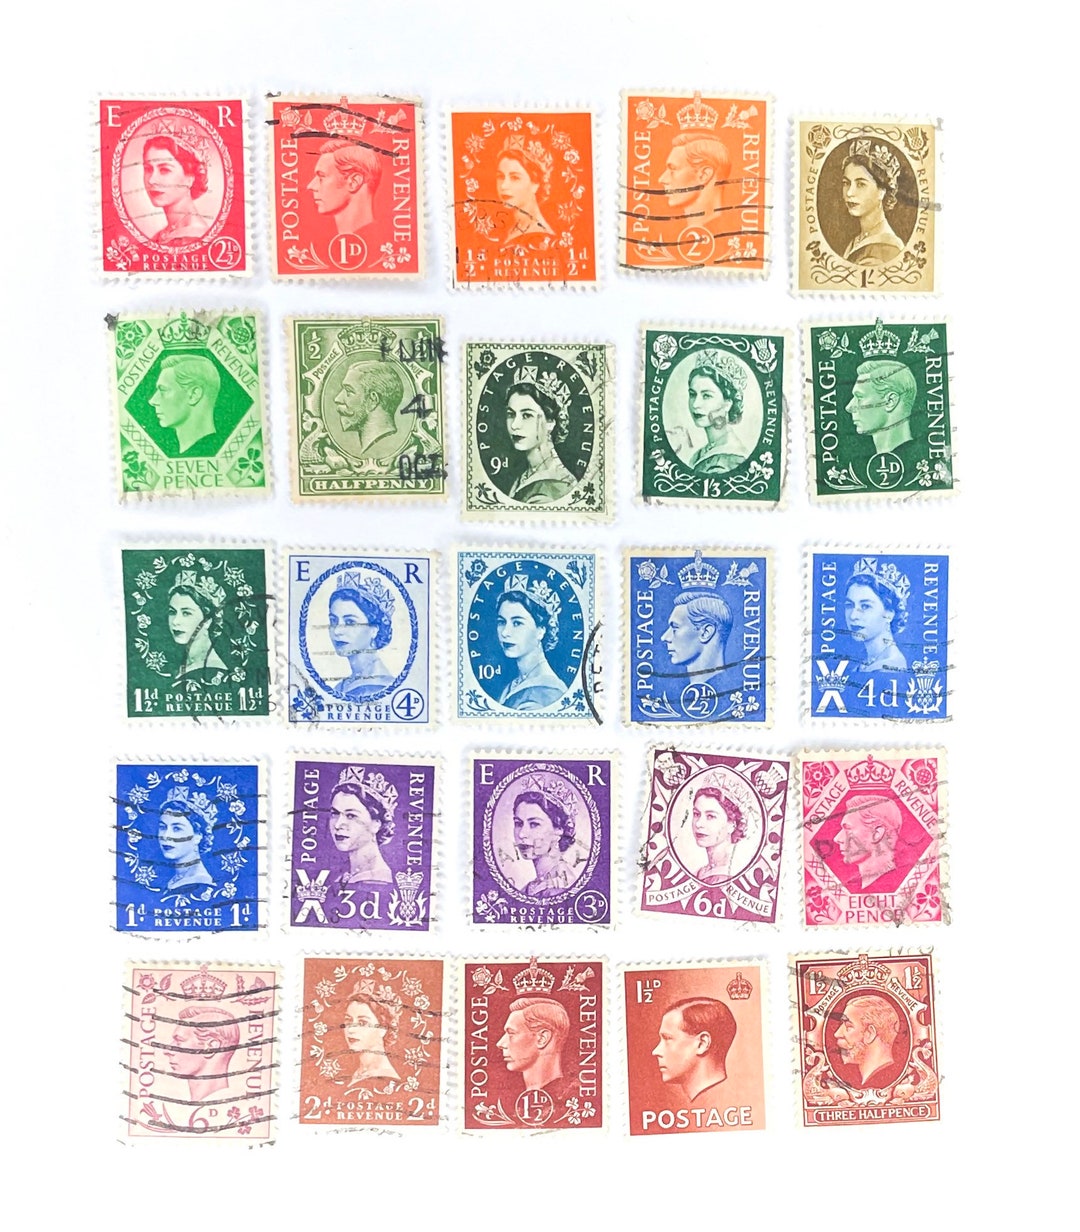 Stamps Down Under: Australia's first postal issues were not even